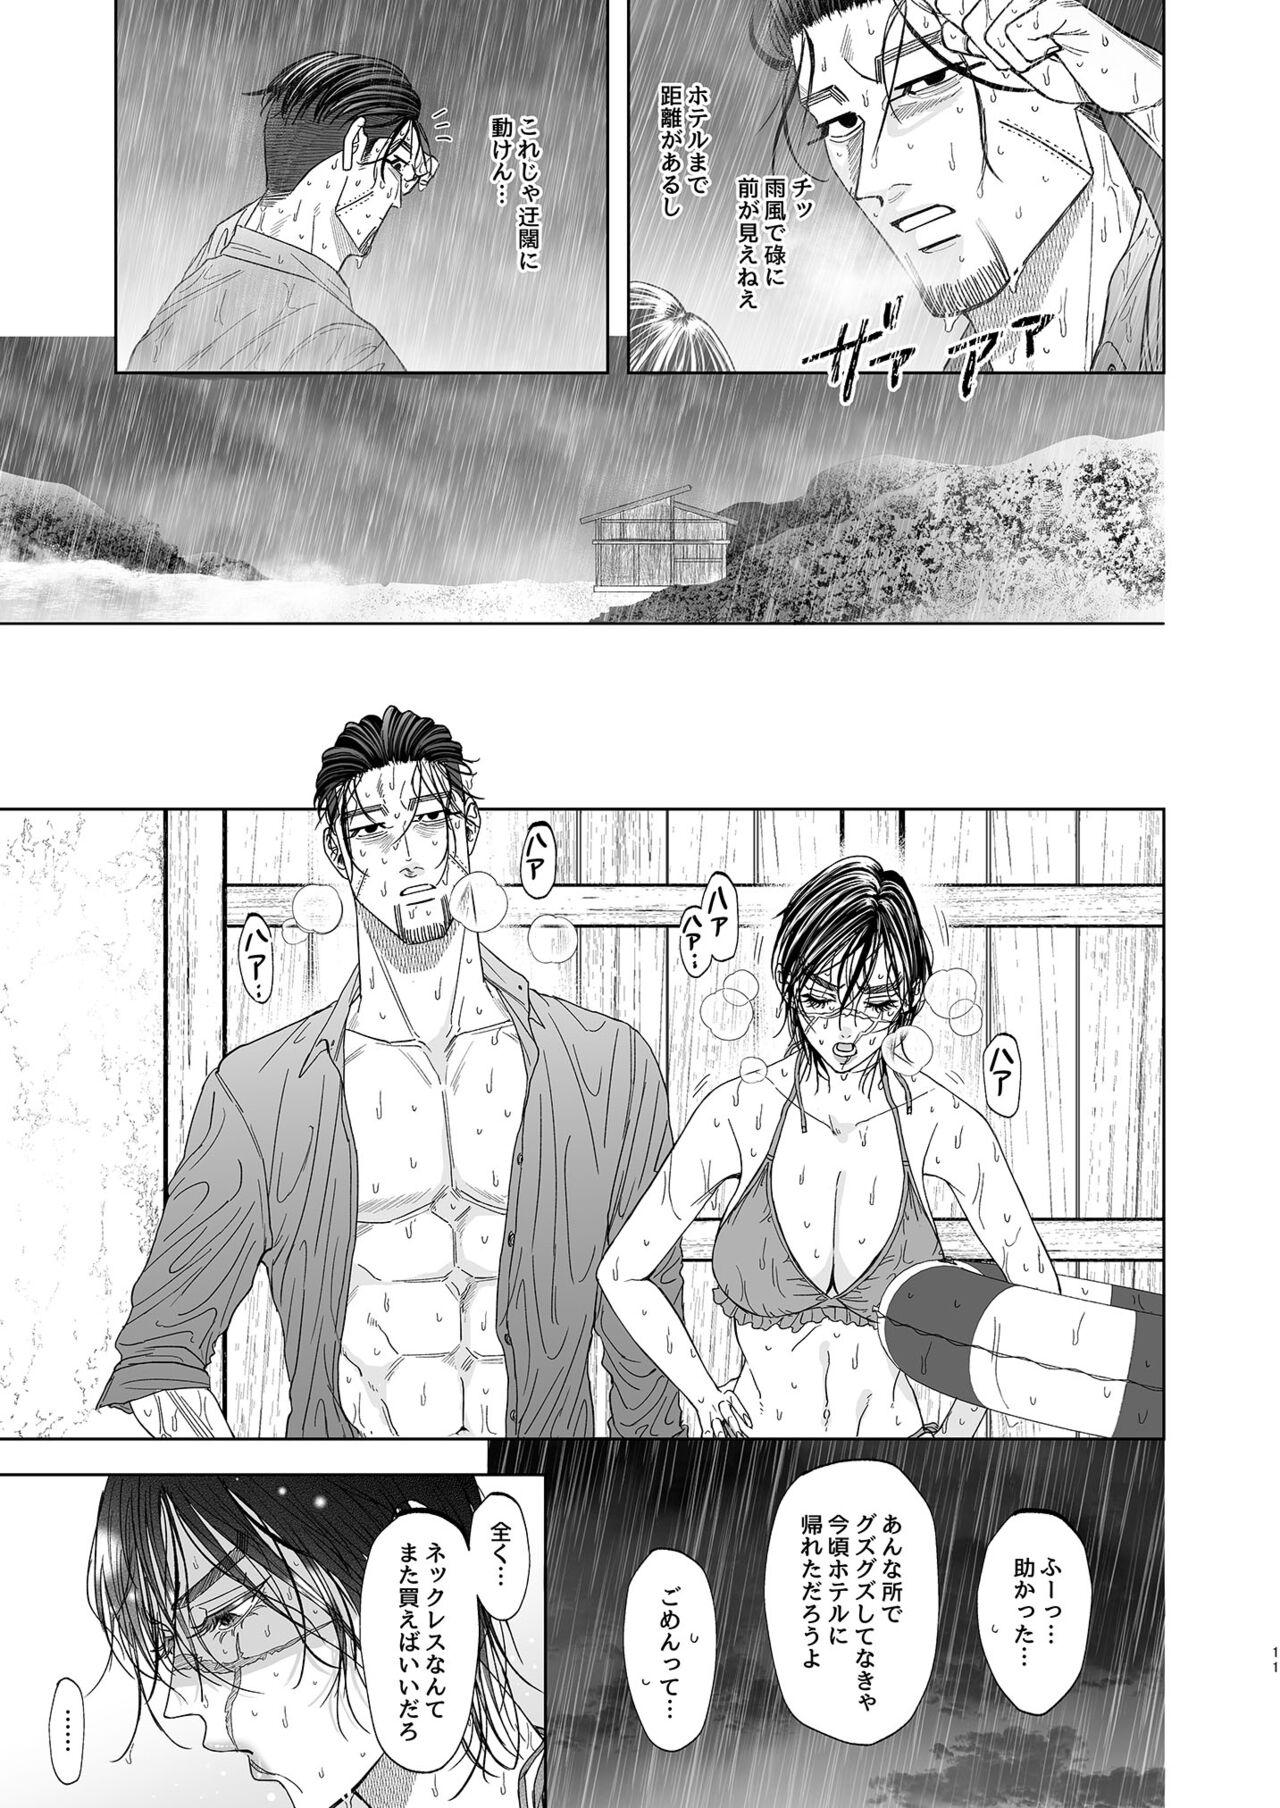 Glamcore Vacance - Golden kamuy Rimming - Page 9